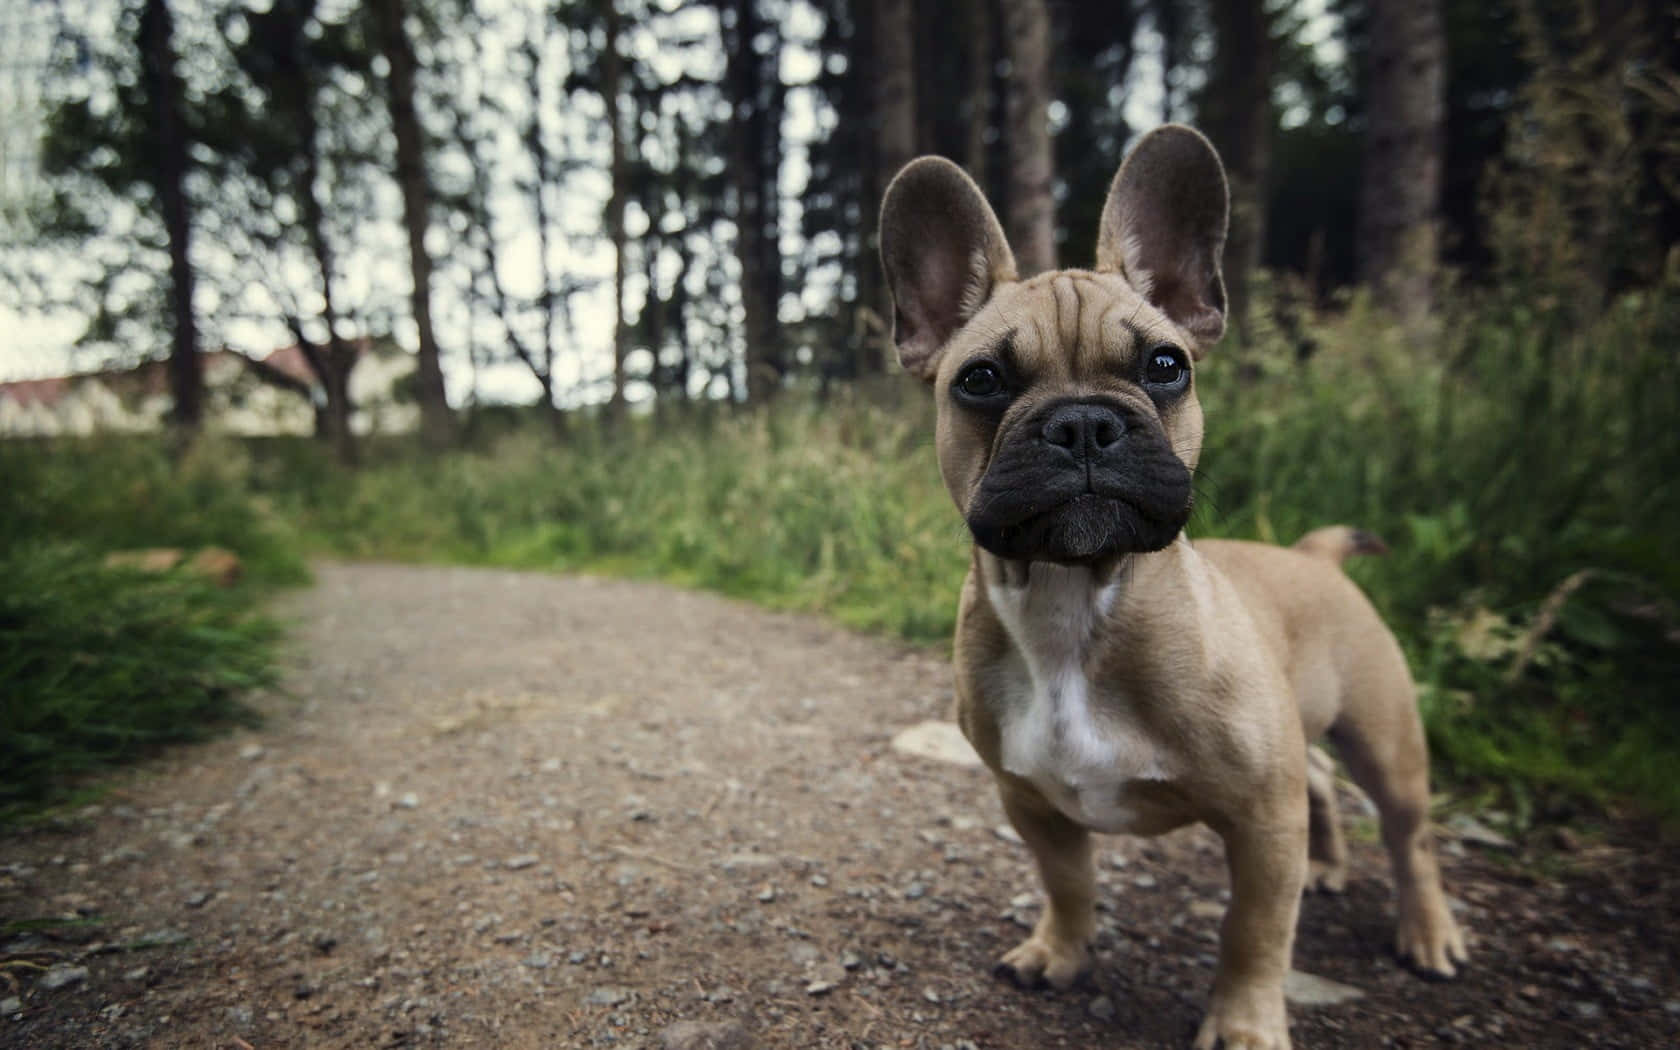 "This Adorable French Bulldog Puppy Ready For Attention"